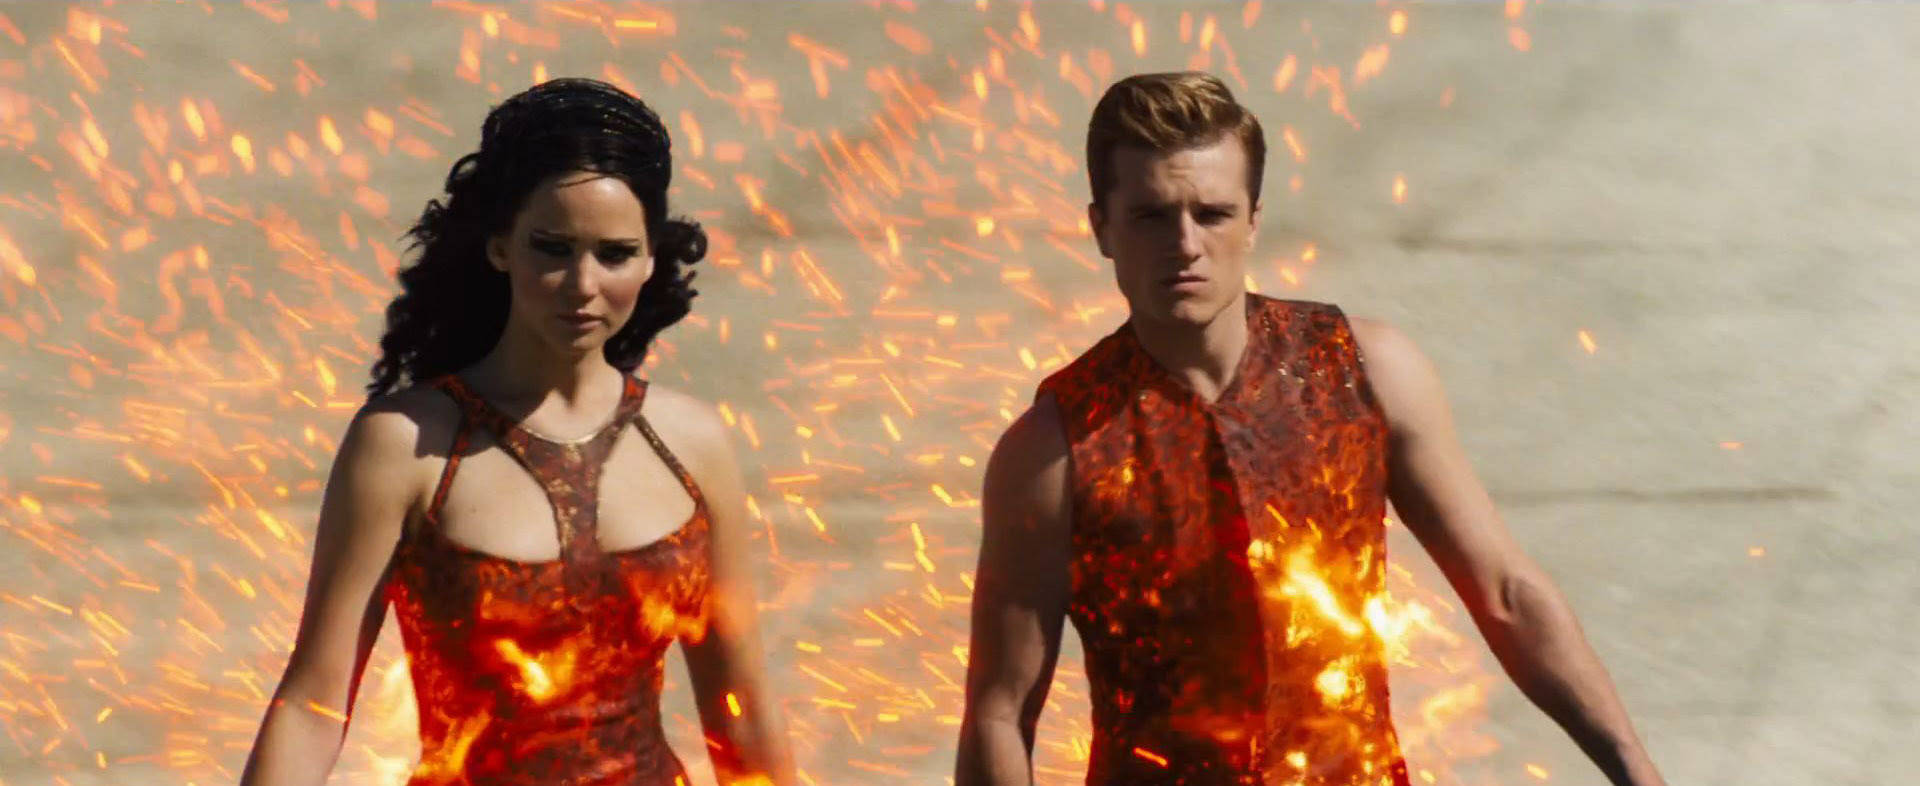 The Hunger Games Flaming Outfit Wallpaper